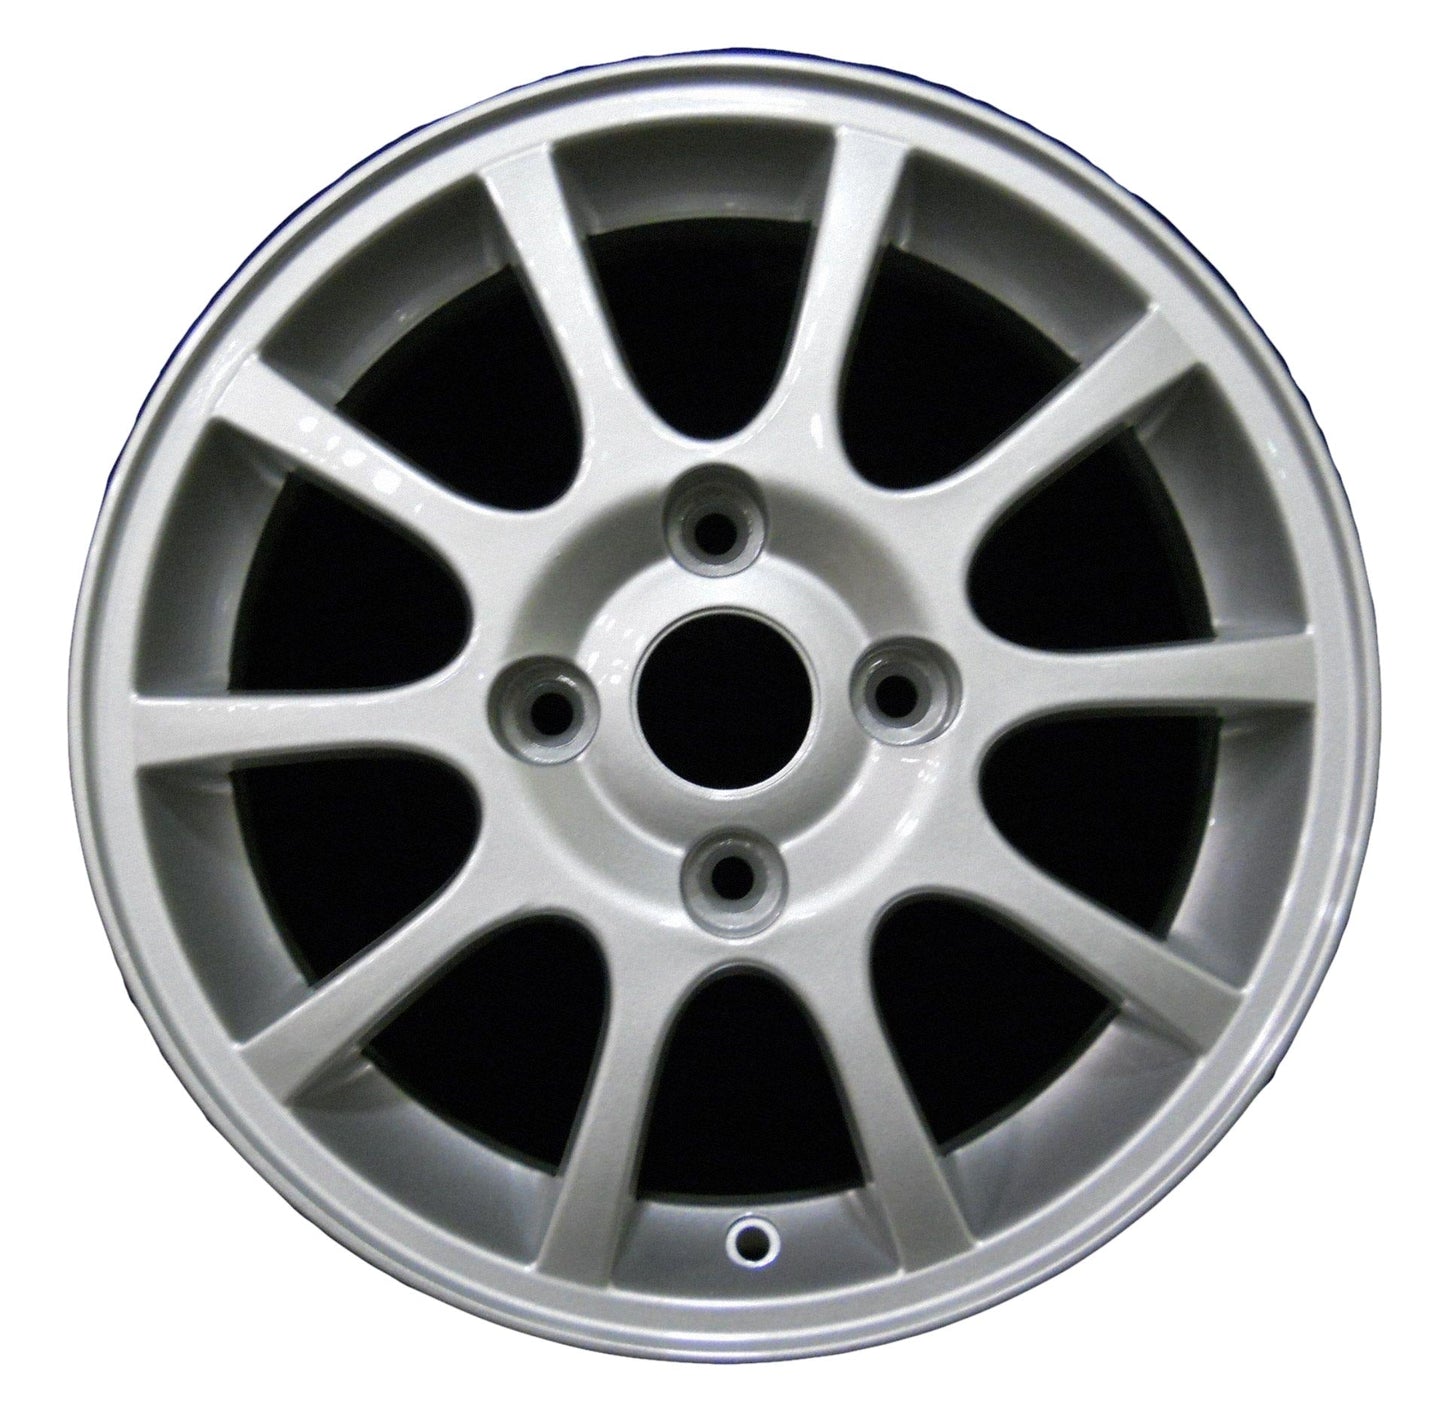 Volvo 40 Series  2000, 2001, 2002, 2003, 2004 Factory OEM Car Wheel Size 15x6 Alloy WAO.70249.PS13.FF